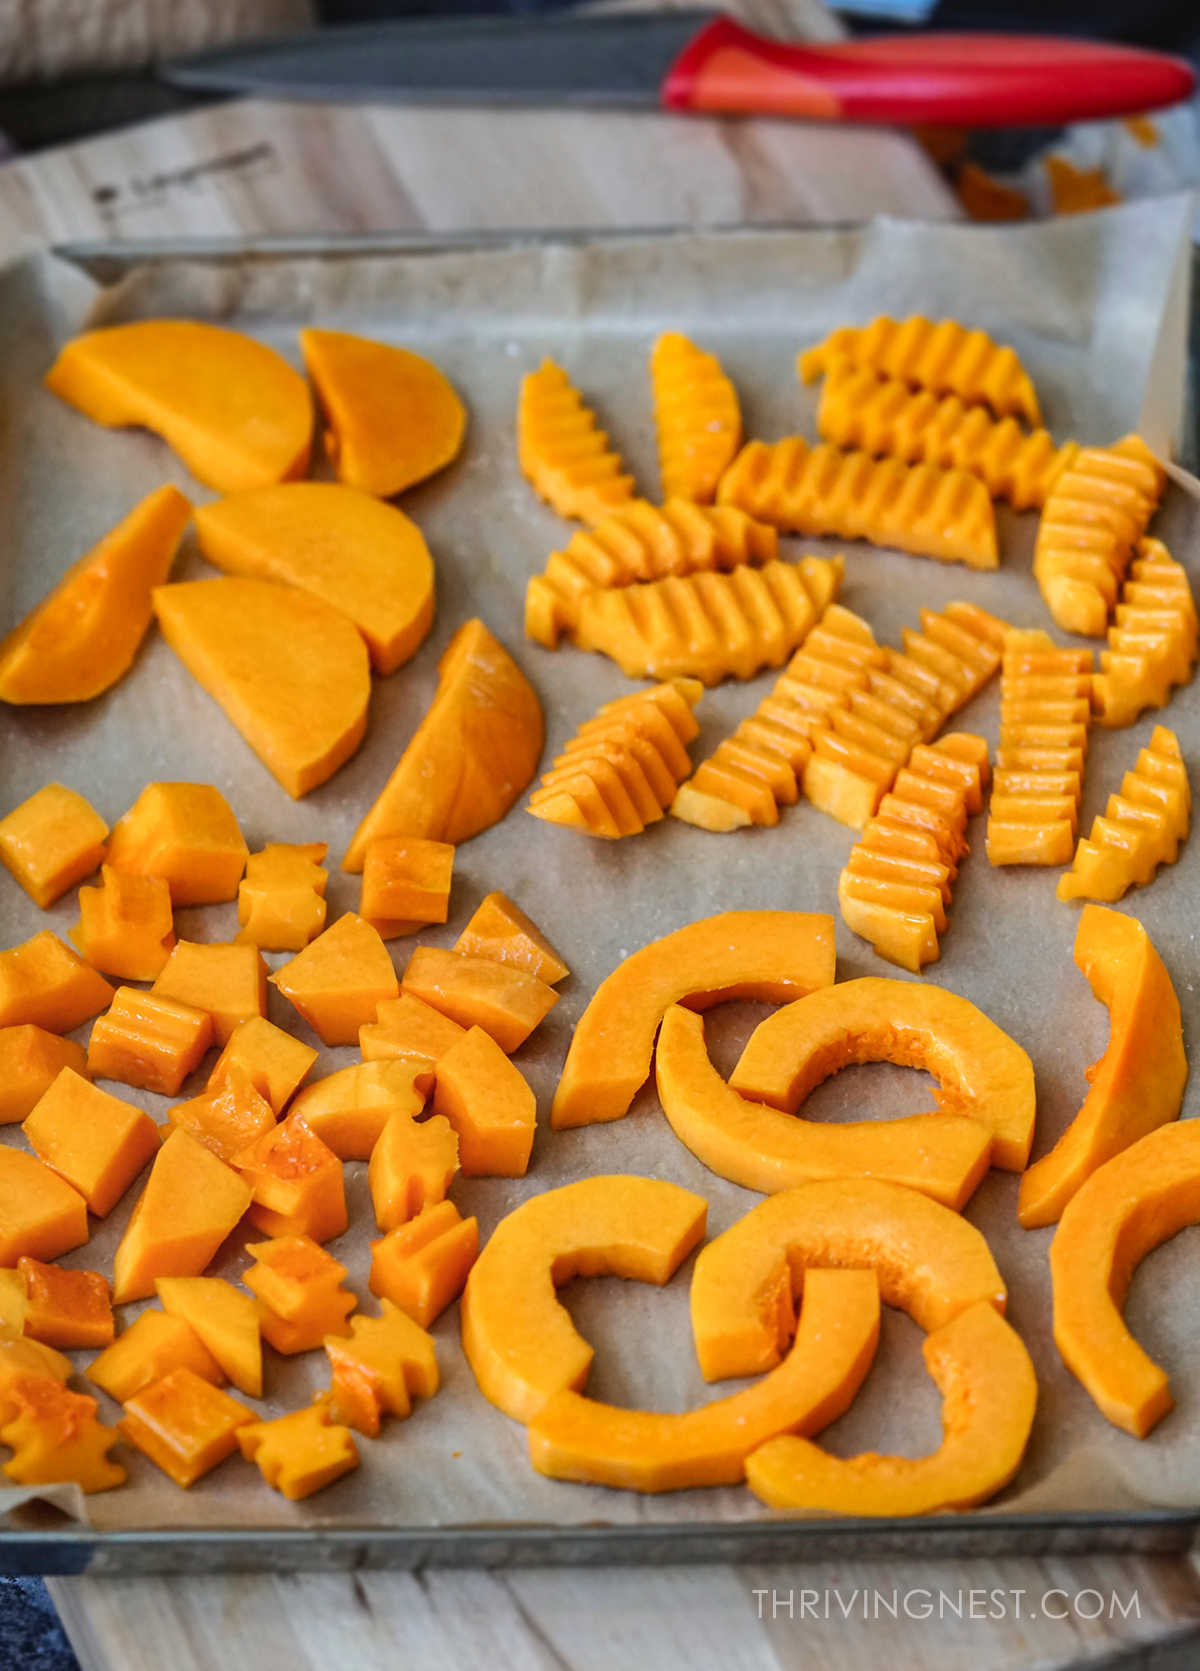 Cut and roasted butternut squash pieces for babies.